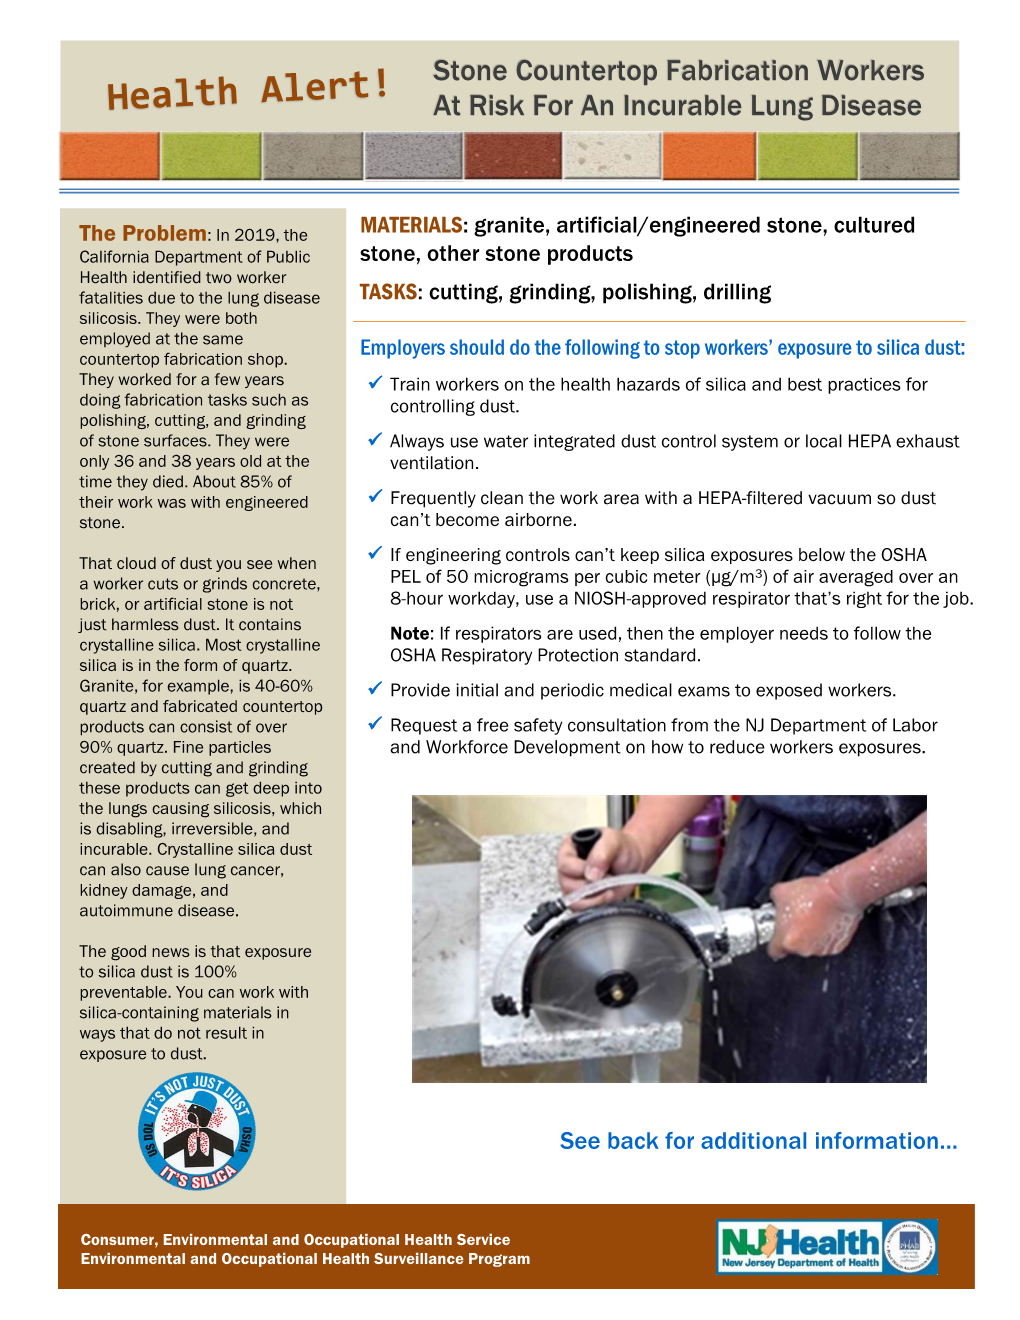 NJDOH Health Alert: Stone Countertop Fabrication Workers At